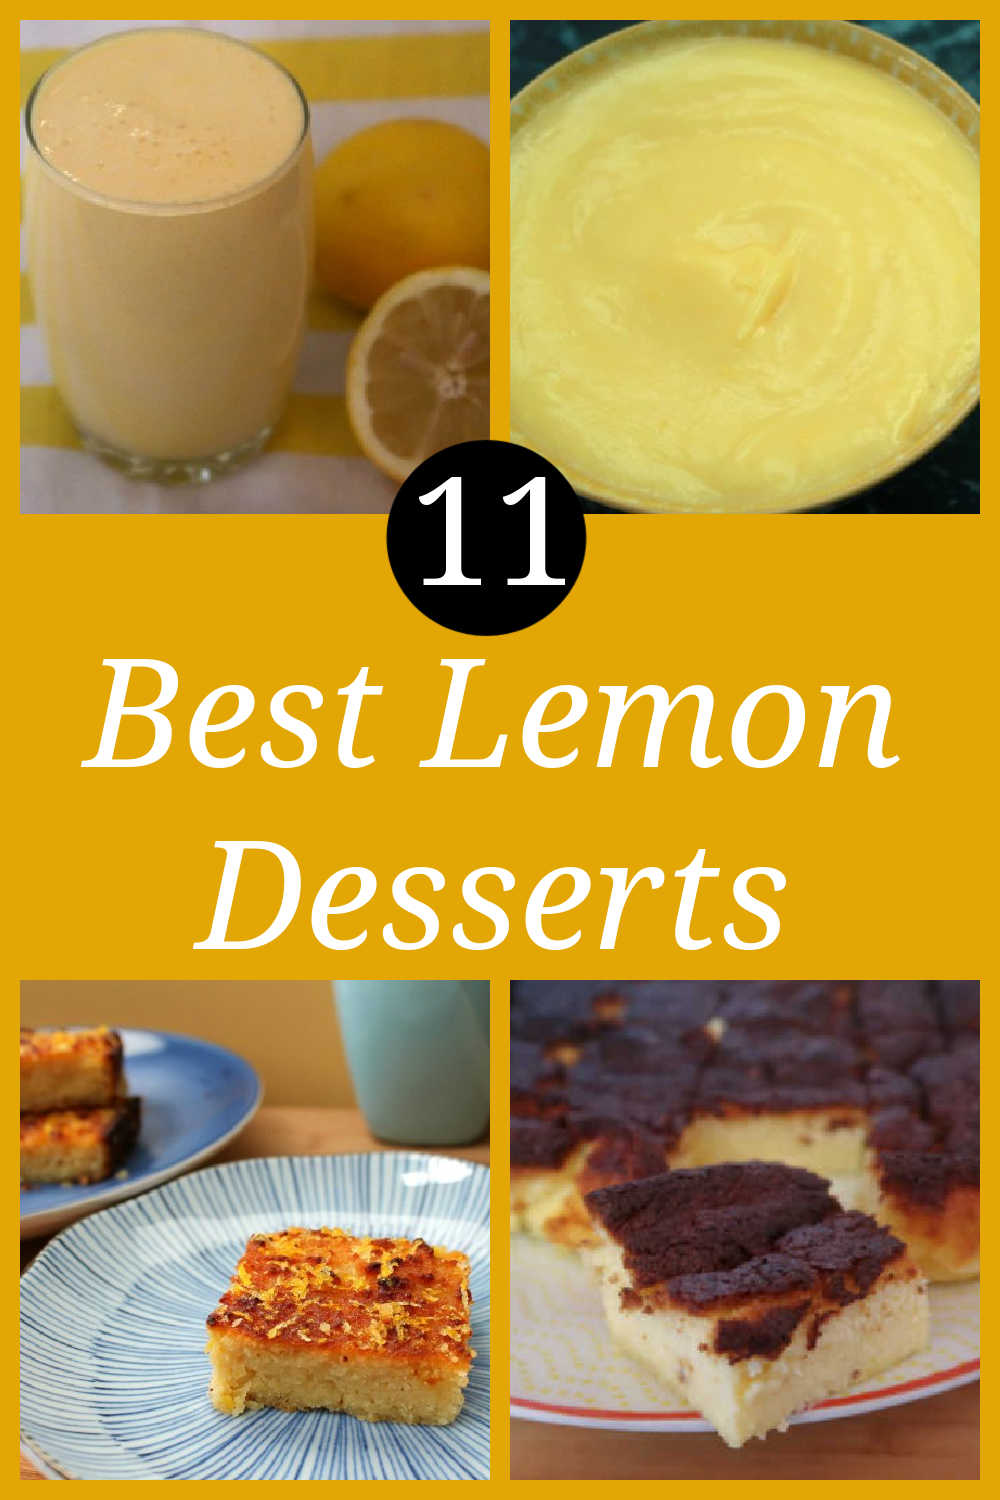 11 Best Lemon Desserts - List of sweet treats including decadent light and easy dessert recipes that are no bake cold treats and baked homemade desserts that will please all lemon lovers.